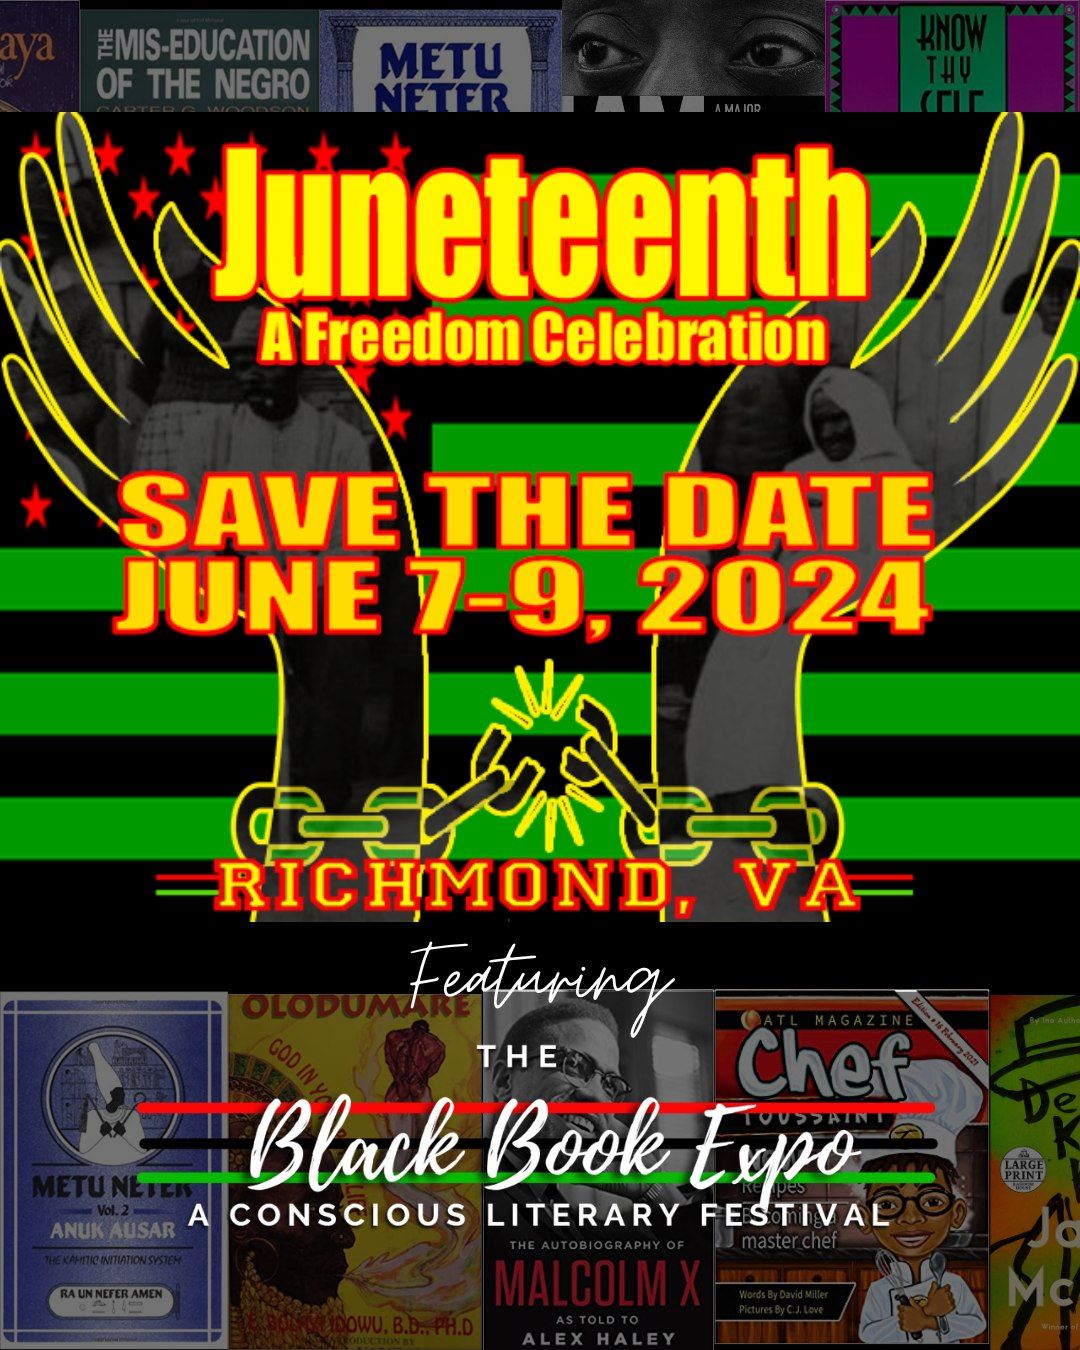 Juneteenth, A Freedom Celebration - A Tribute to the Ancestors, Along the Trail of Enslaved Africans